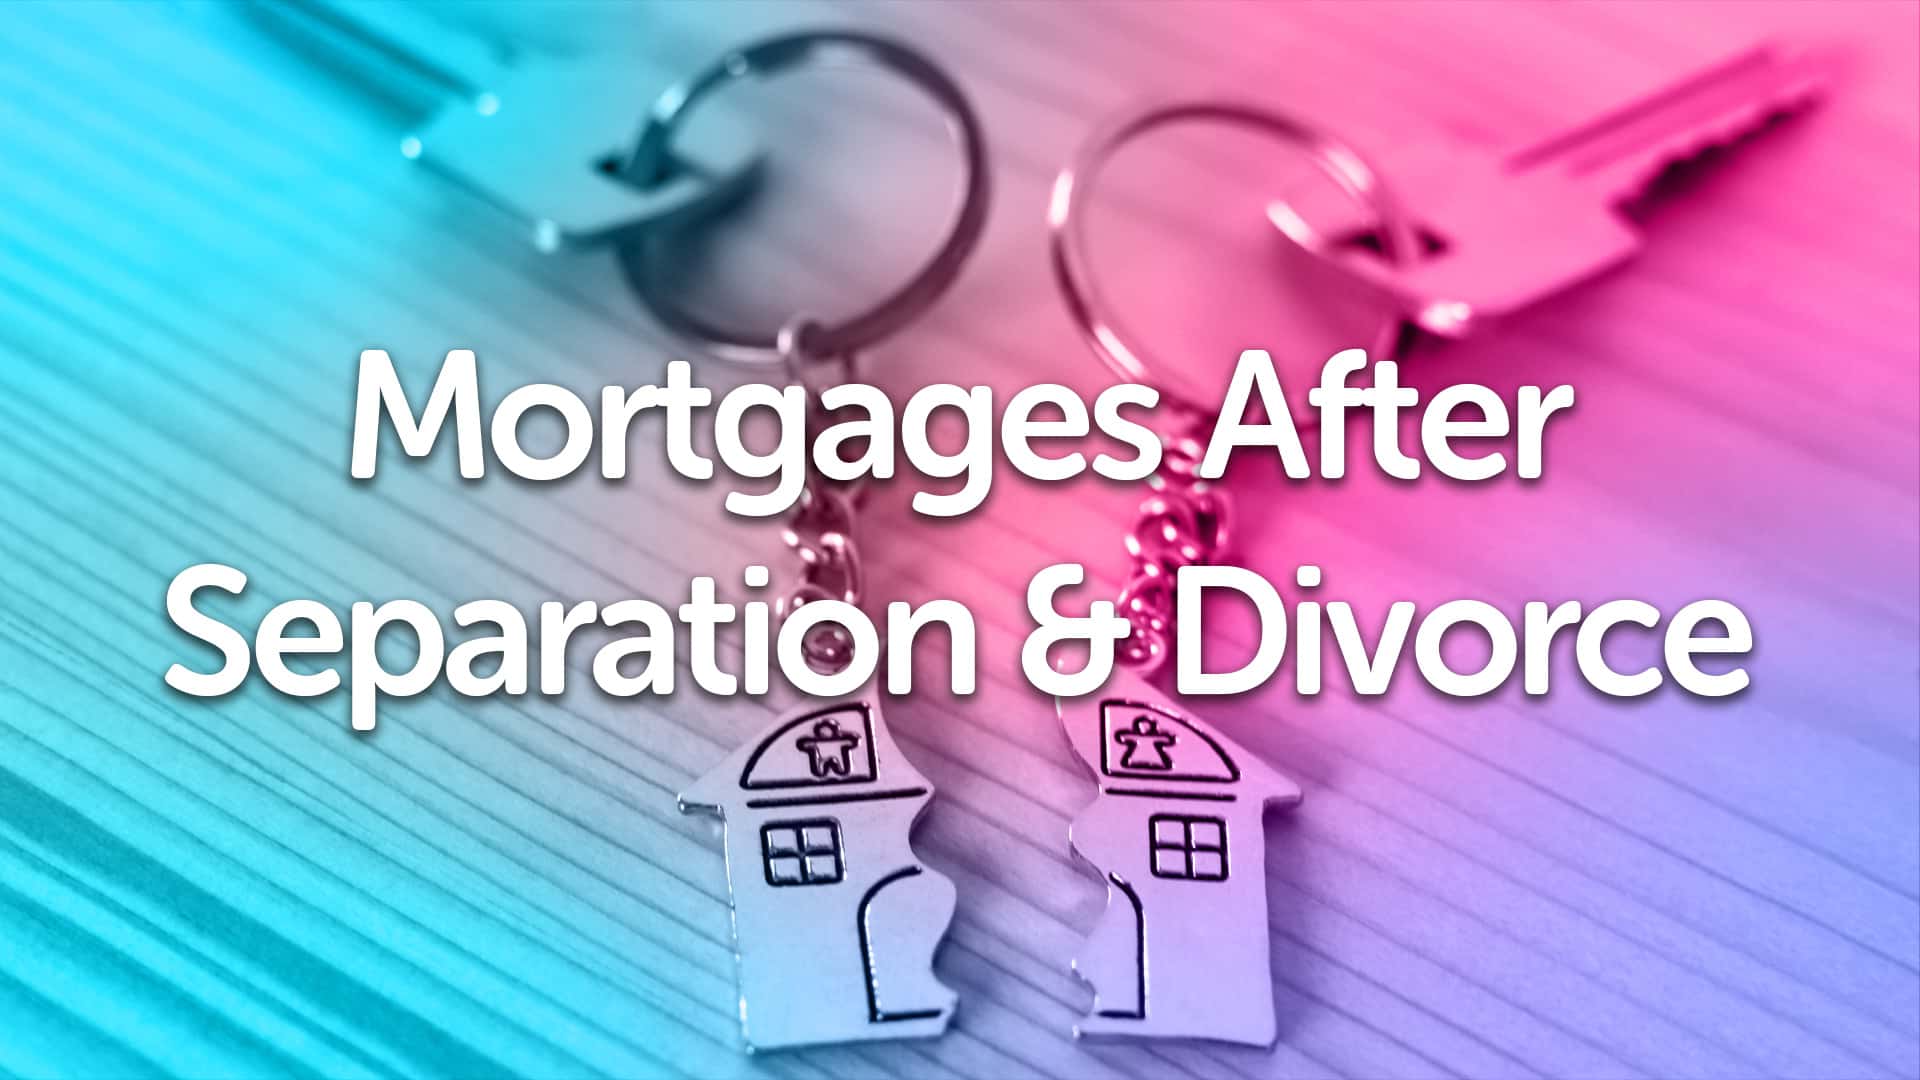 Divorce & Separation Mortgage Advice in Leicester